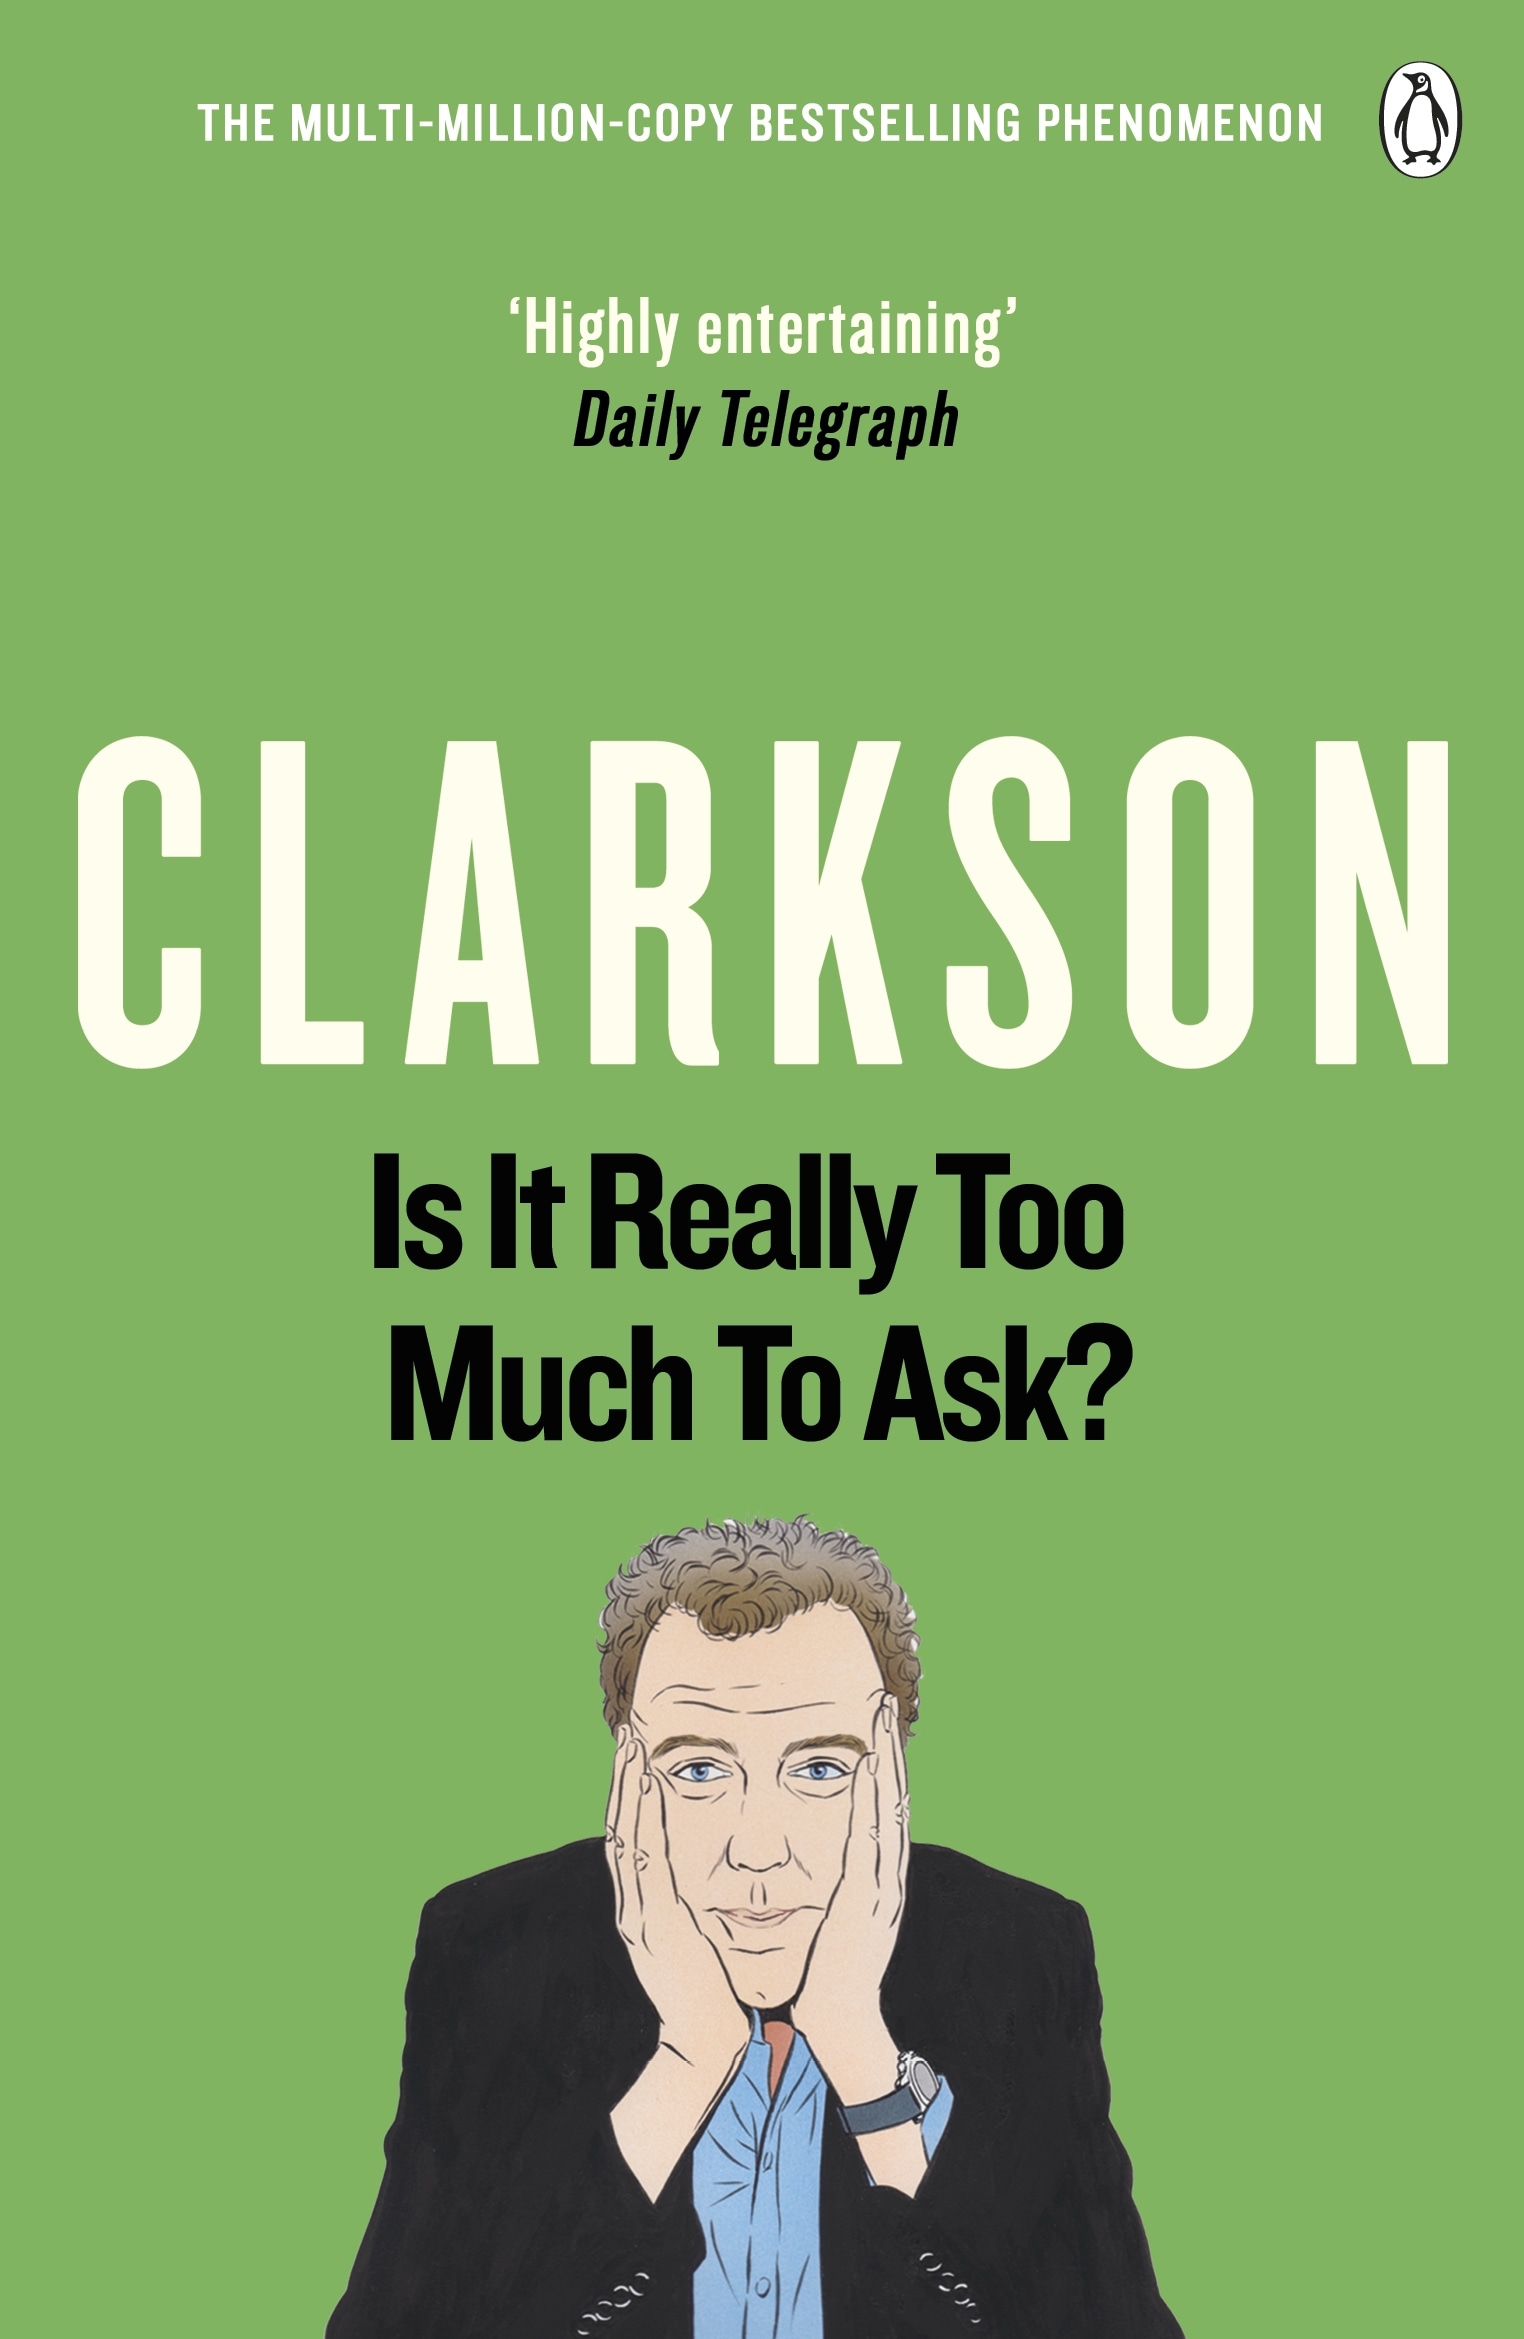 Book “Is It Really Too Much To Ask?” by Jeremy Clarkson